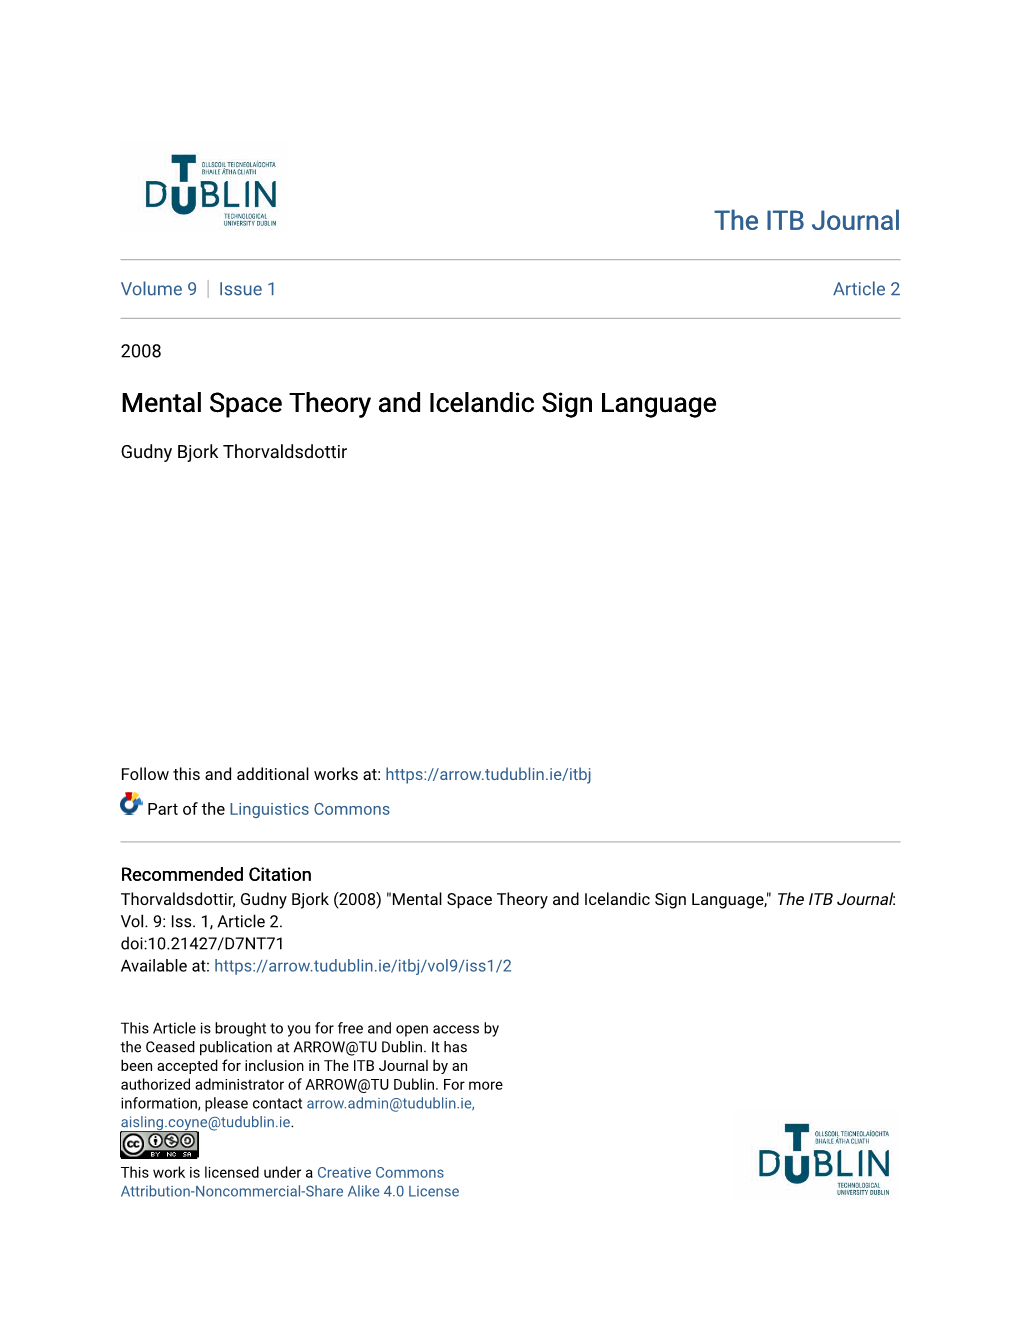 Mental Space Theory and Icelandic Sign Language